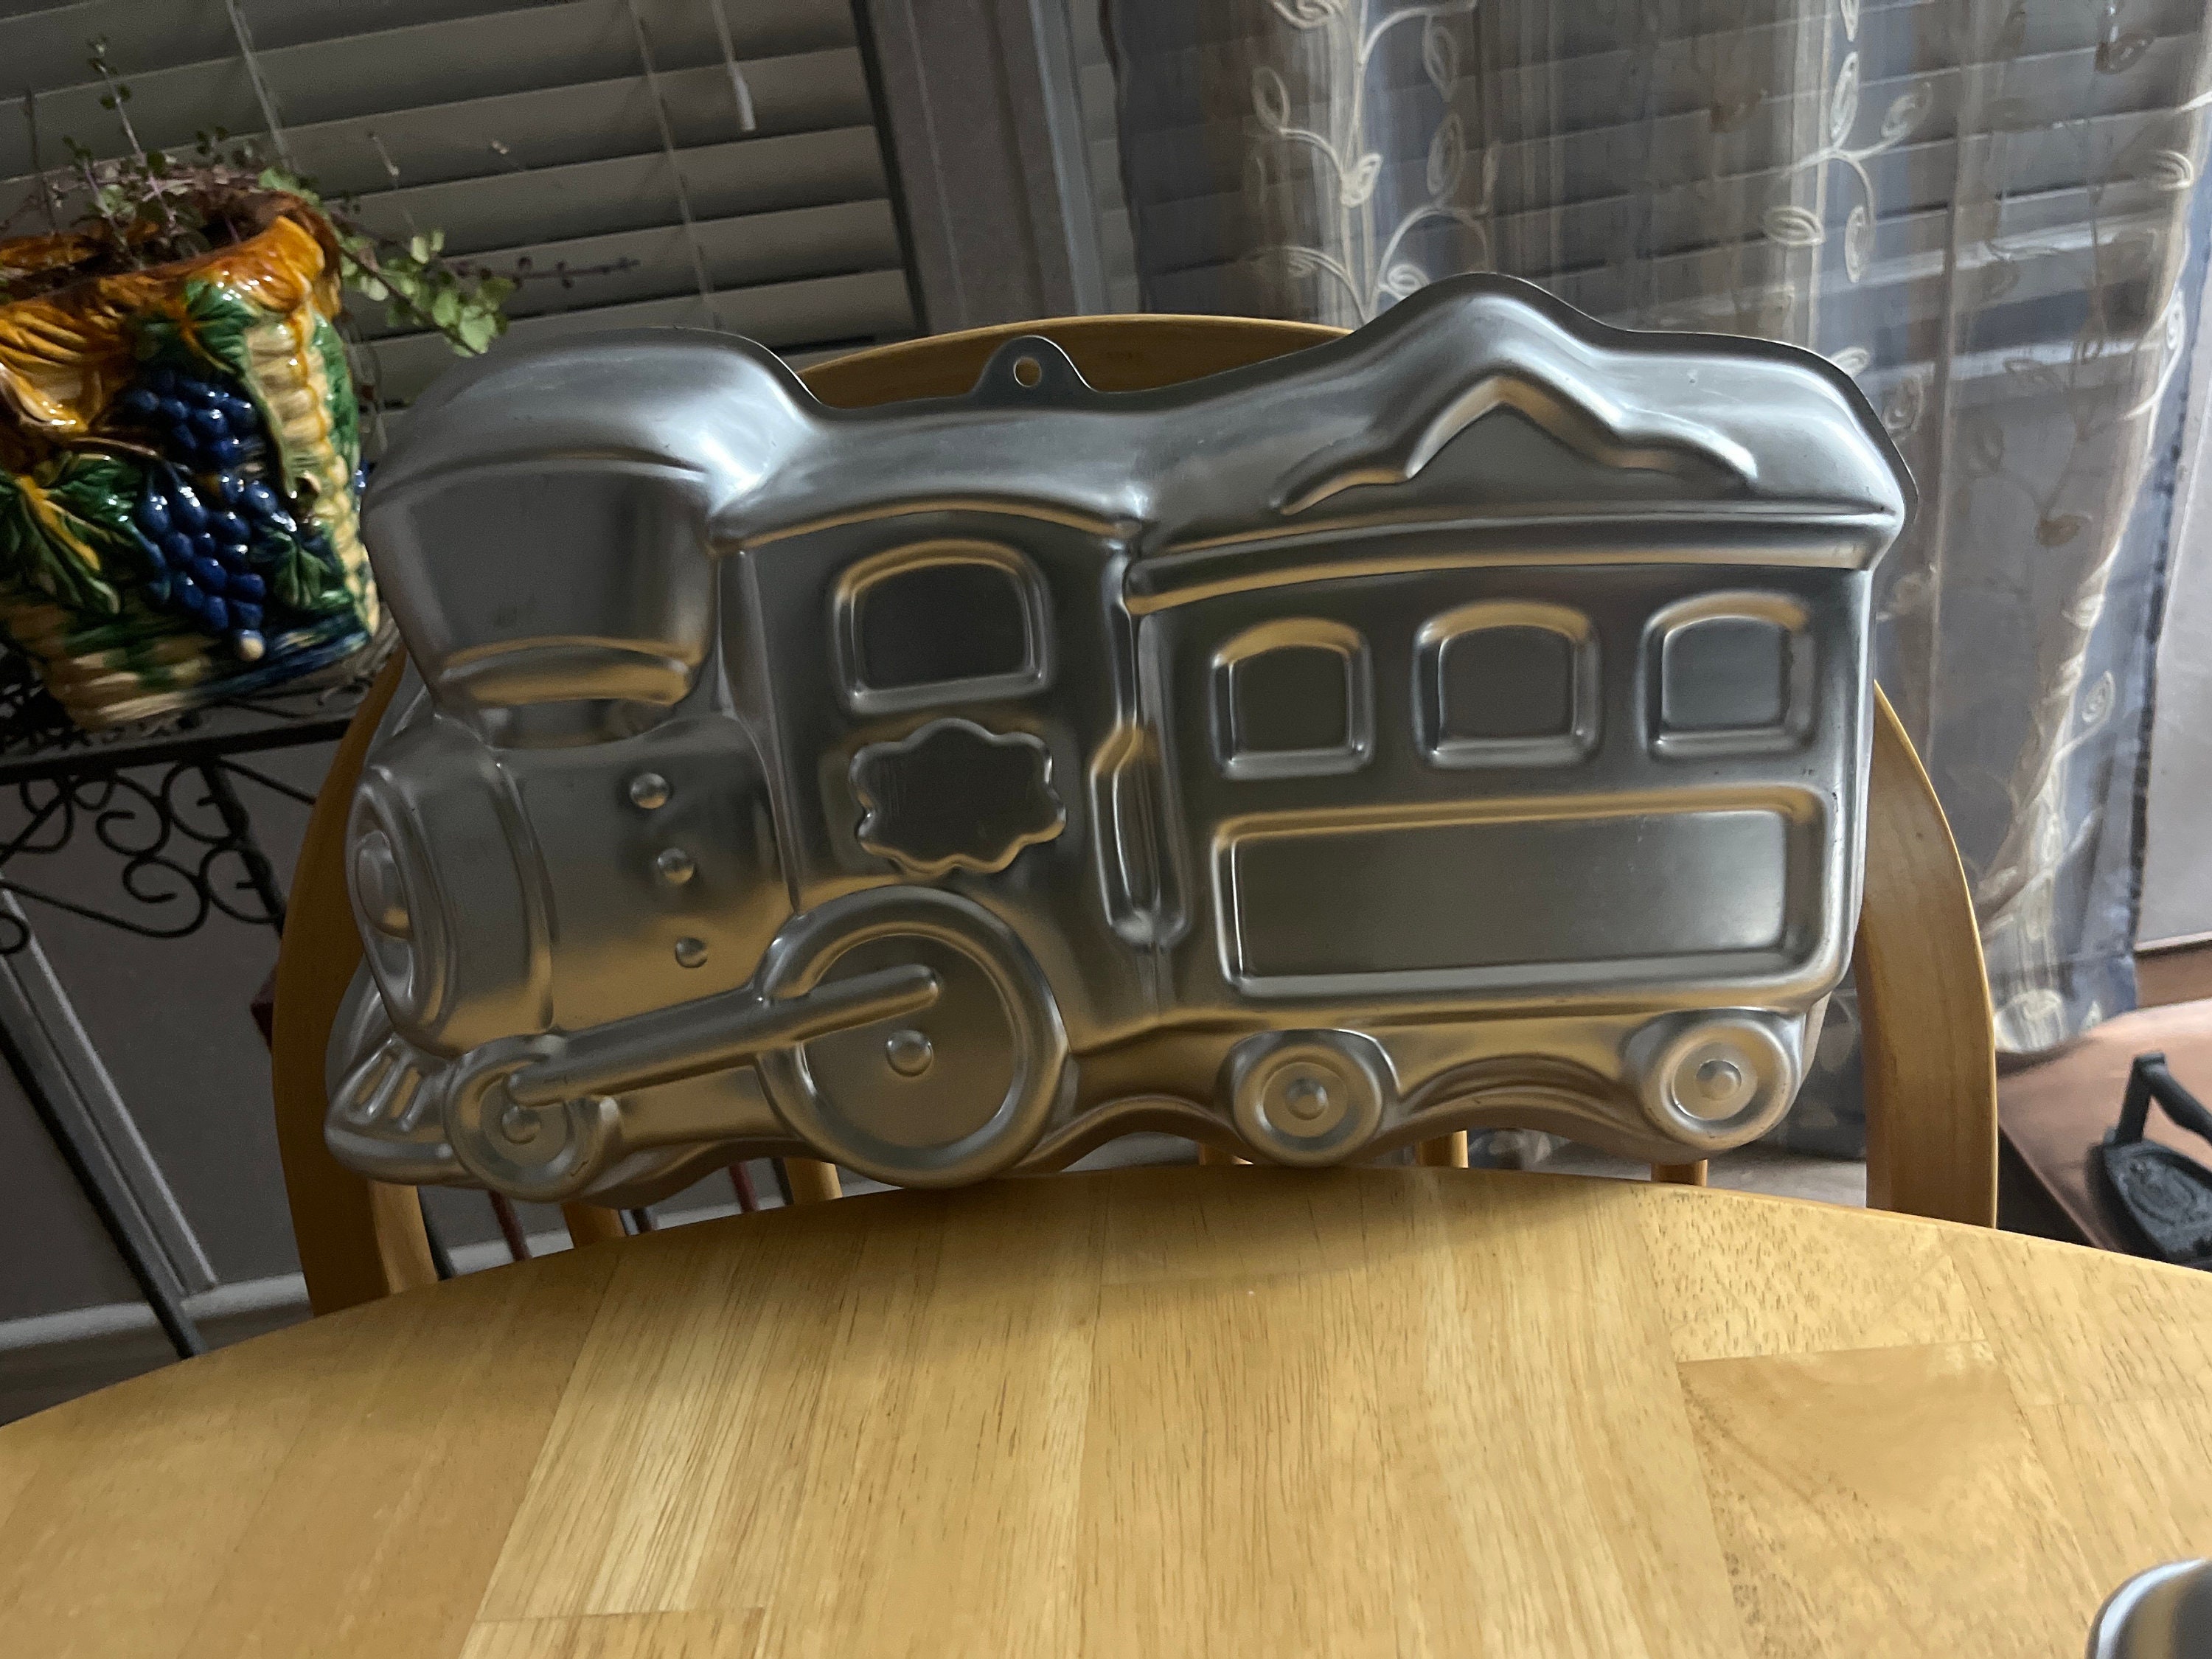 Wilton mini locomotive singles cake pan, makes 6 individual train cakes for  kids Birthday parties, candy molds, aluminum molds.